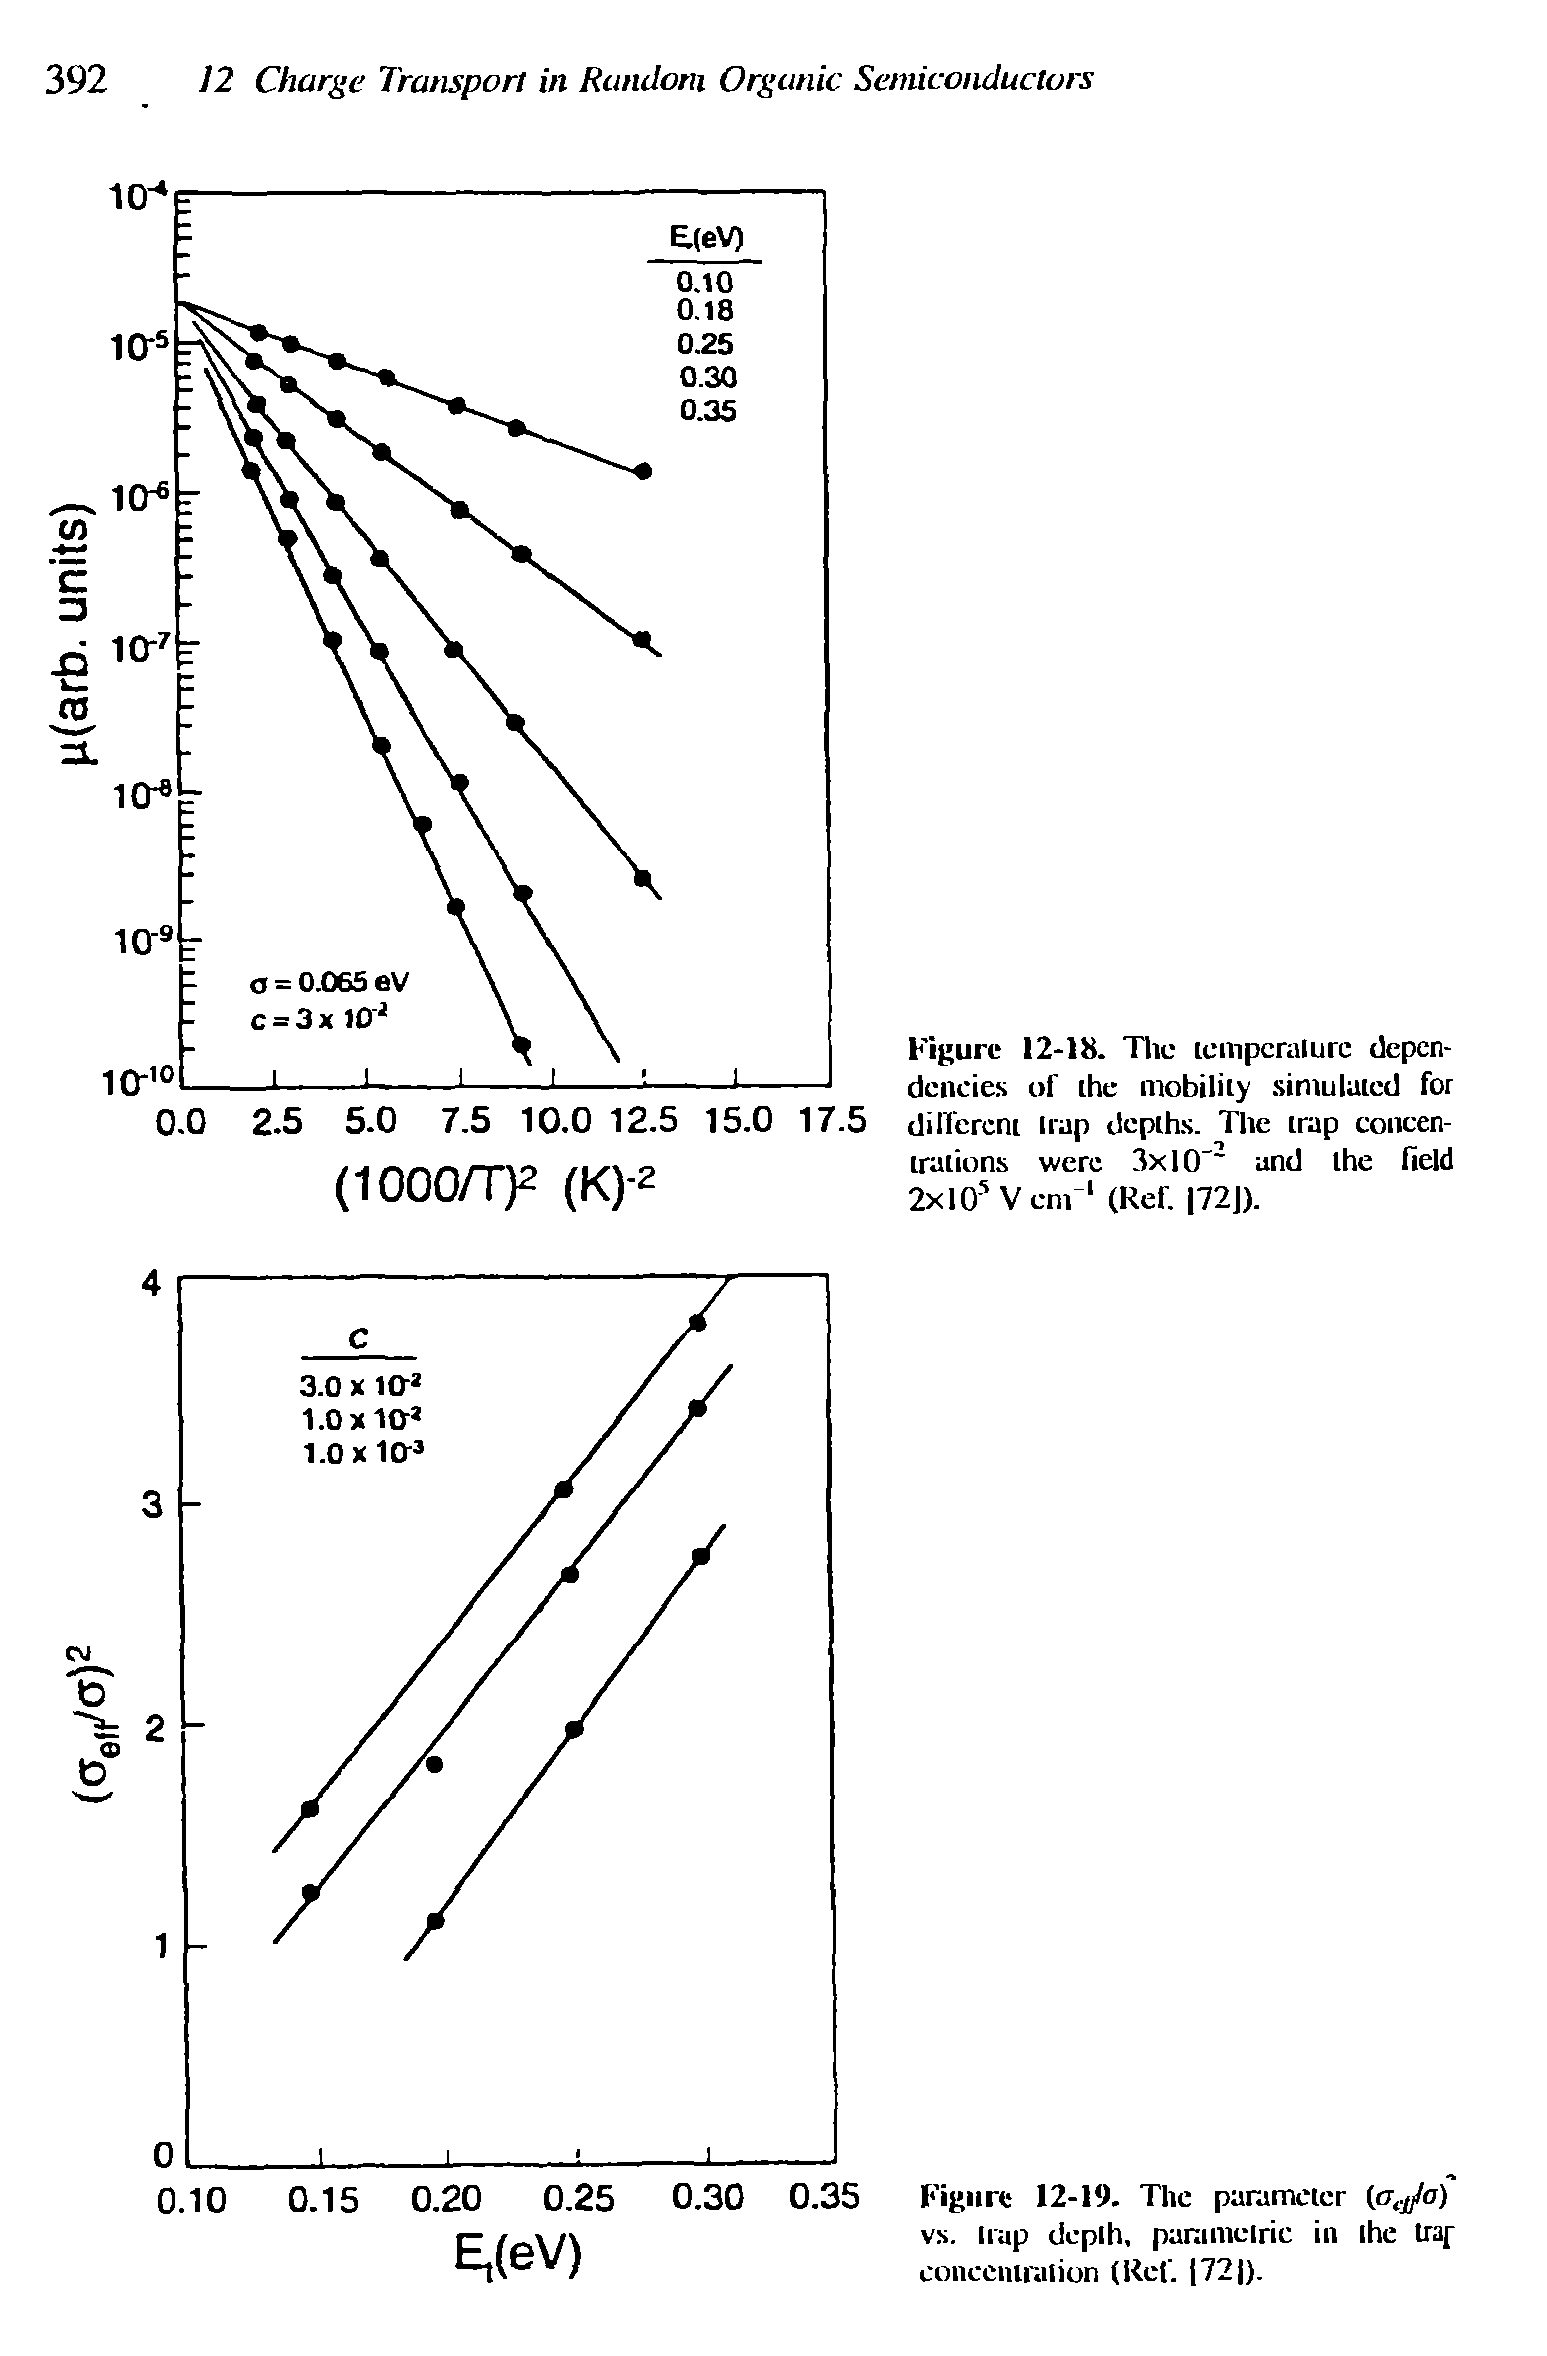 Figure 12-19. The parameter (aejJa) vs. Hup depih, parametric in the trap concentration (Ref. 72 ).